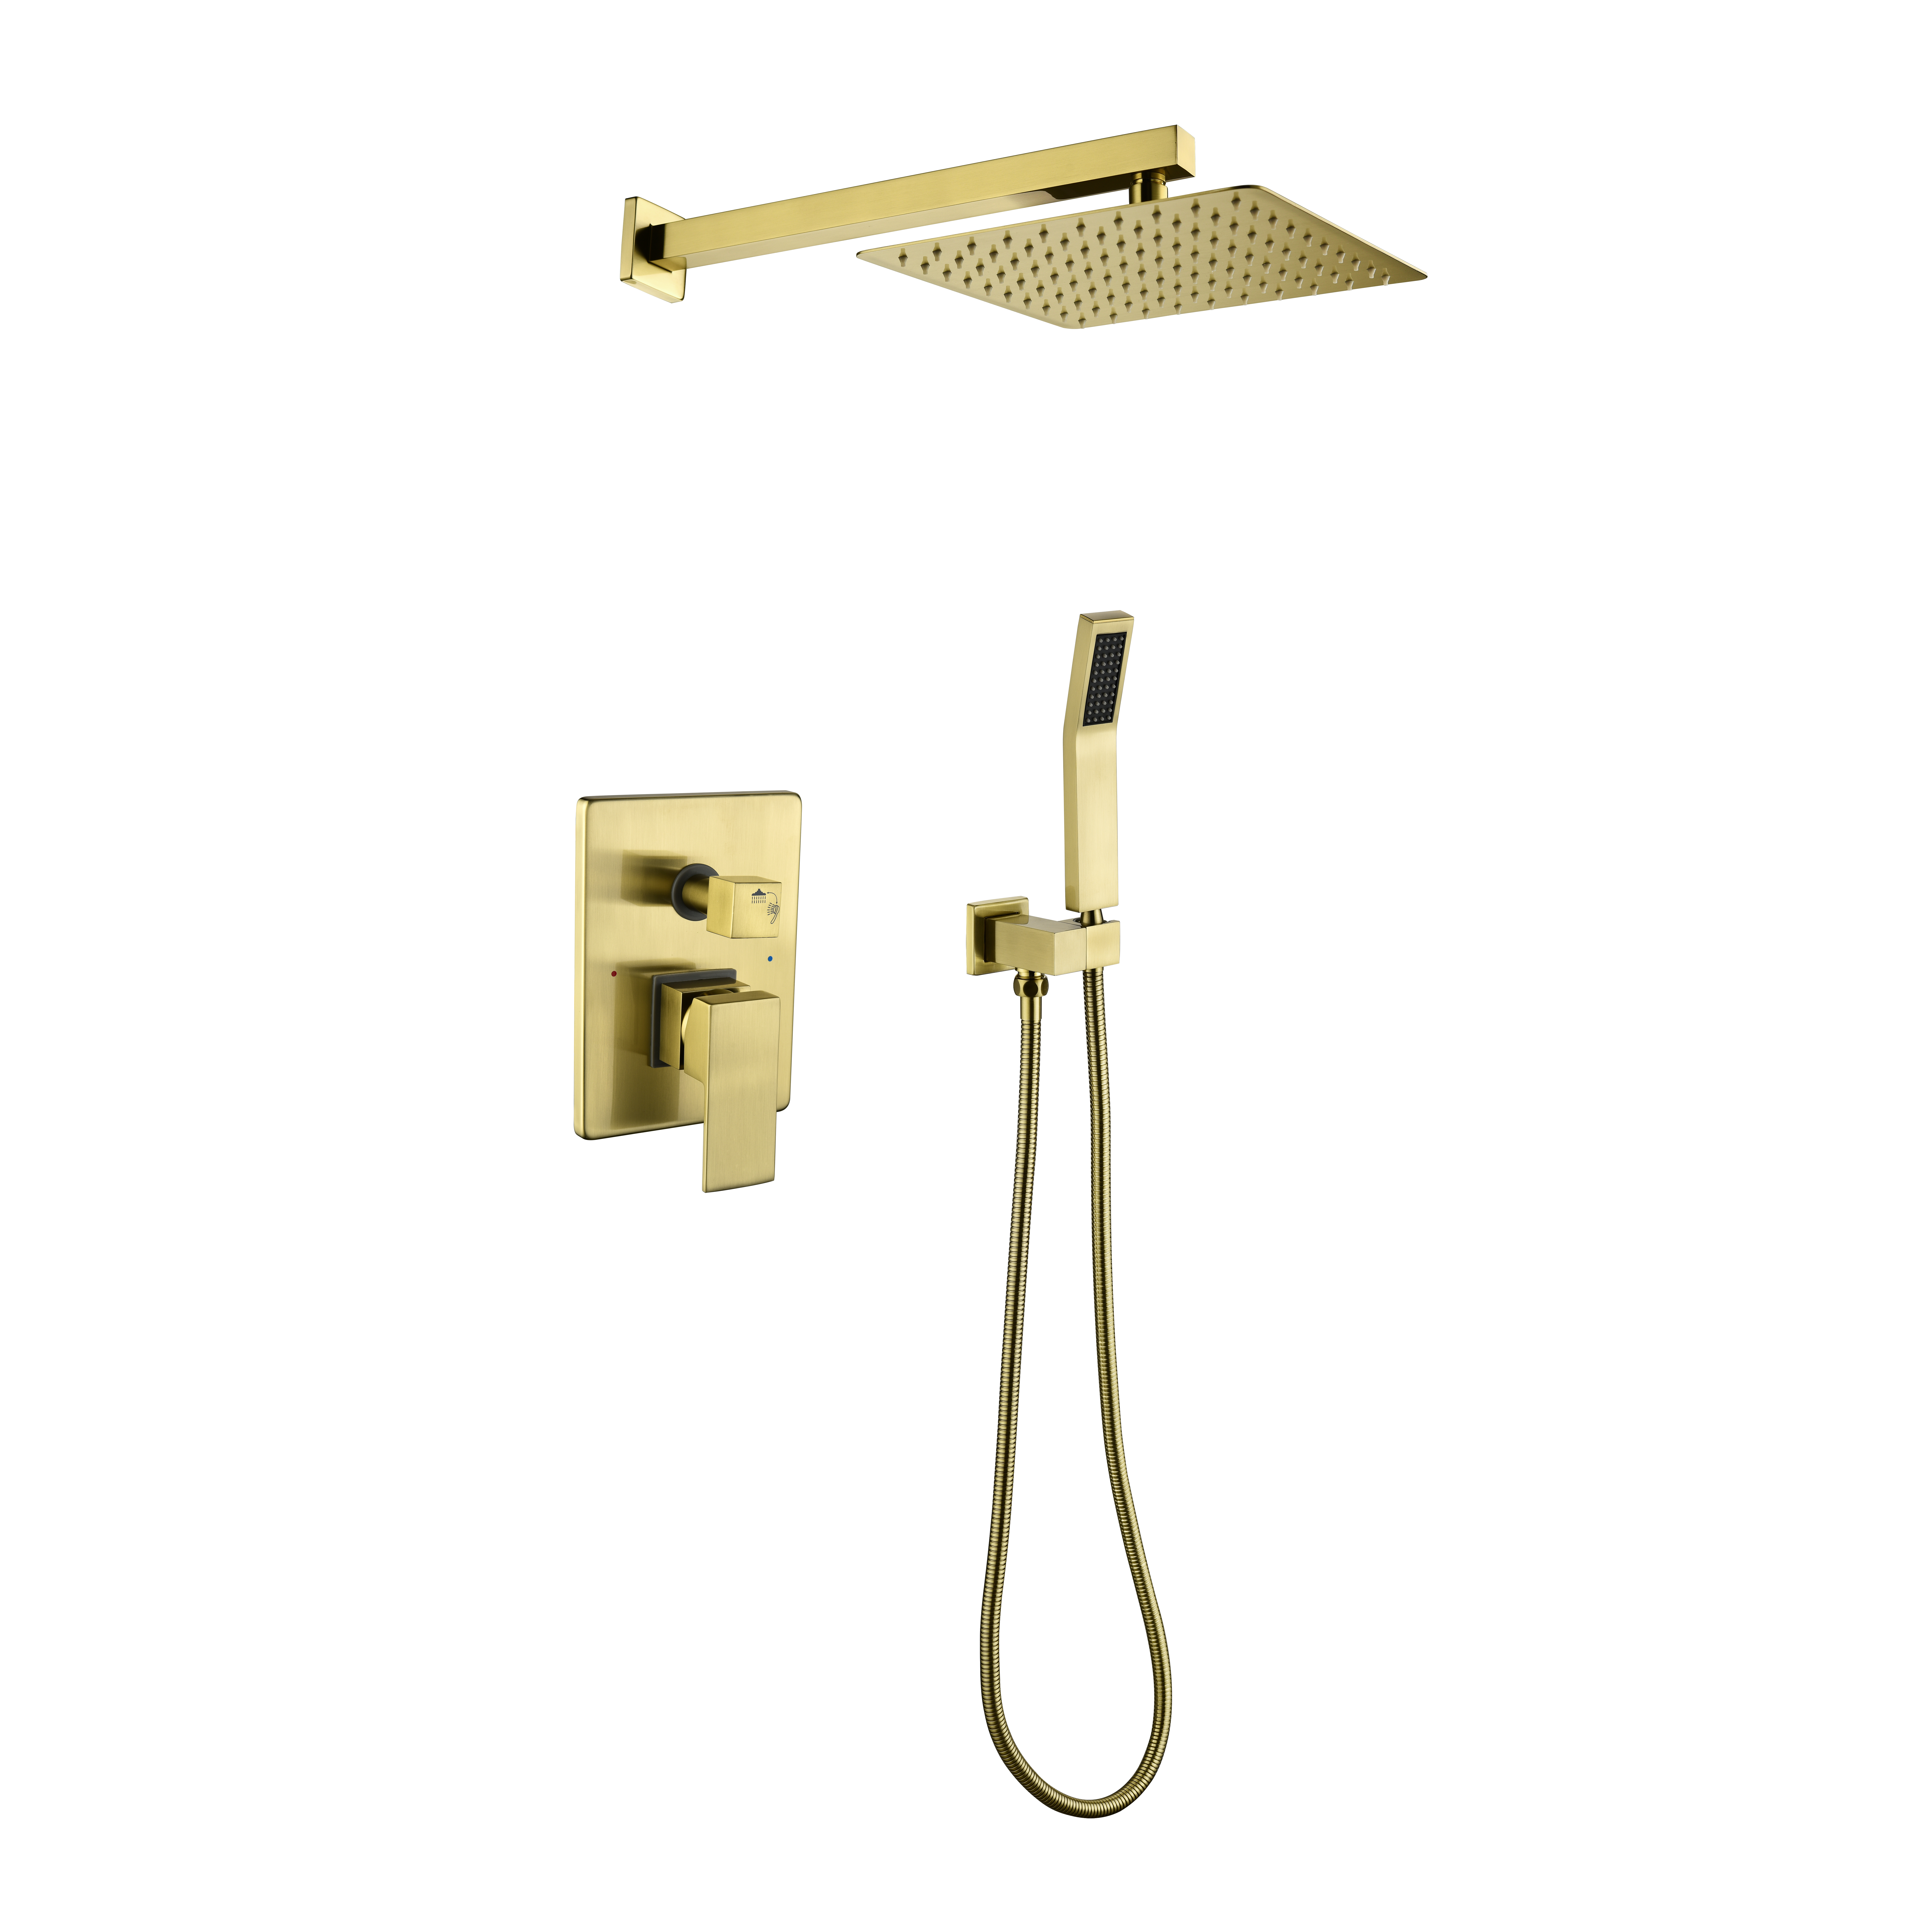 Brushed Gold Shower System, Bathroom 10 Inches Rain Shower Head with Handheld Combo Set, Wall Mounted High Pressure Rainfall Dual Shower Head System, Shower Faucet Set with Valve and Trim-CASAINC